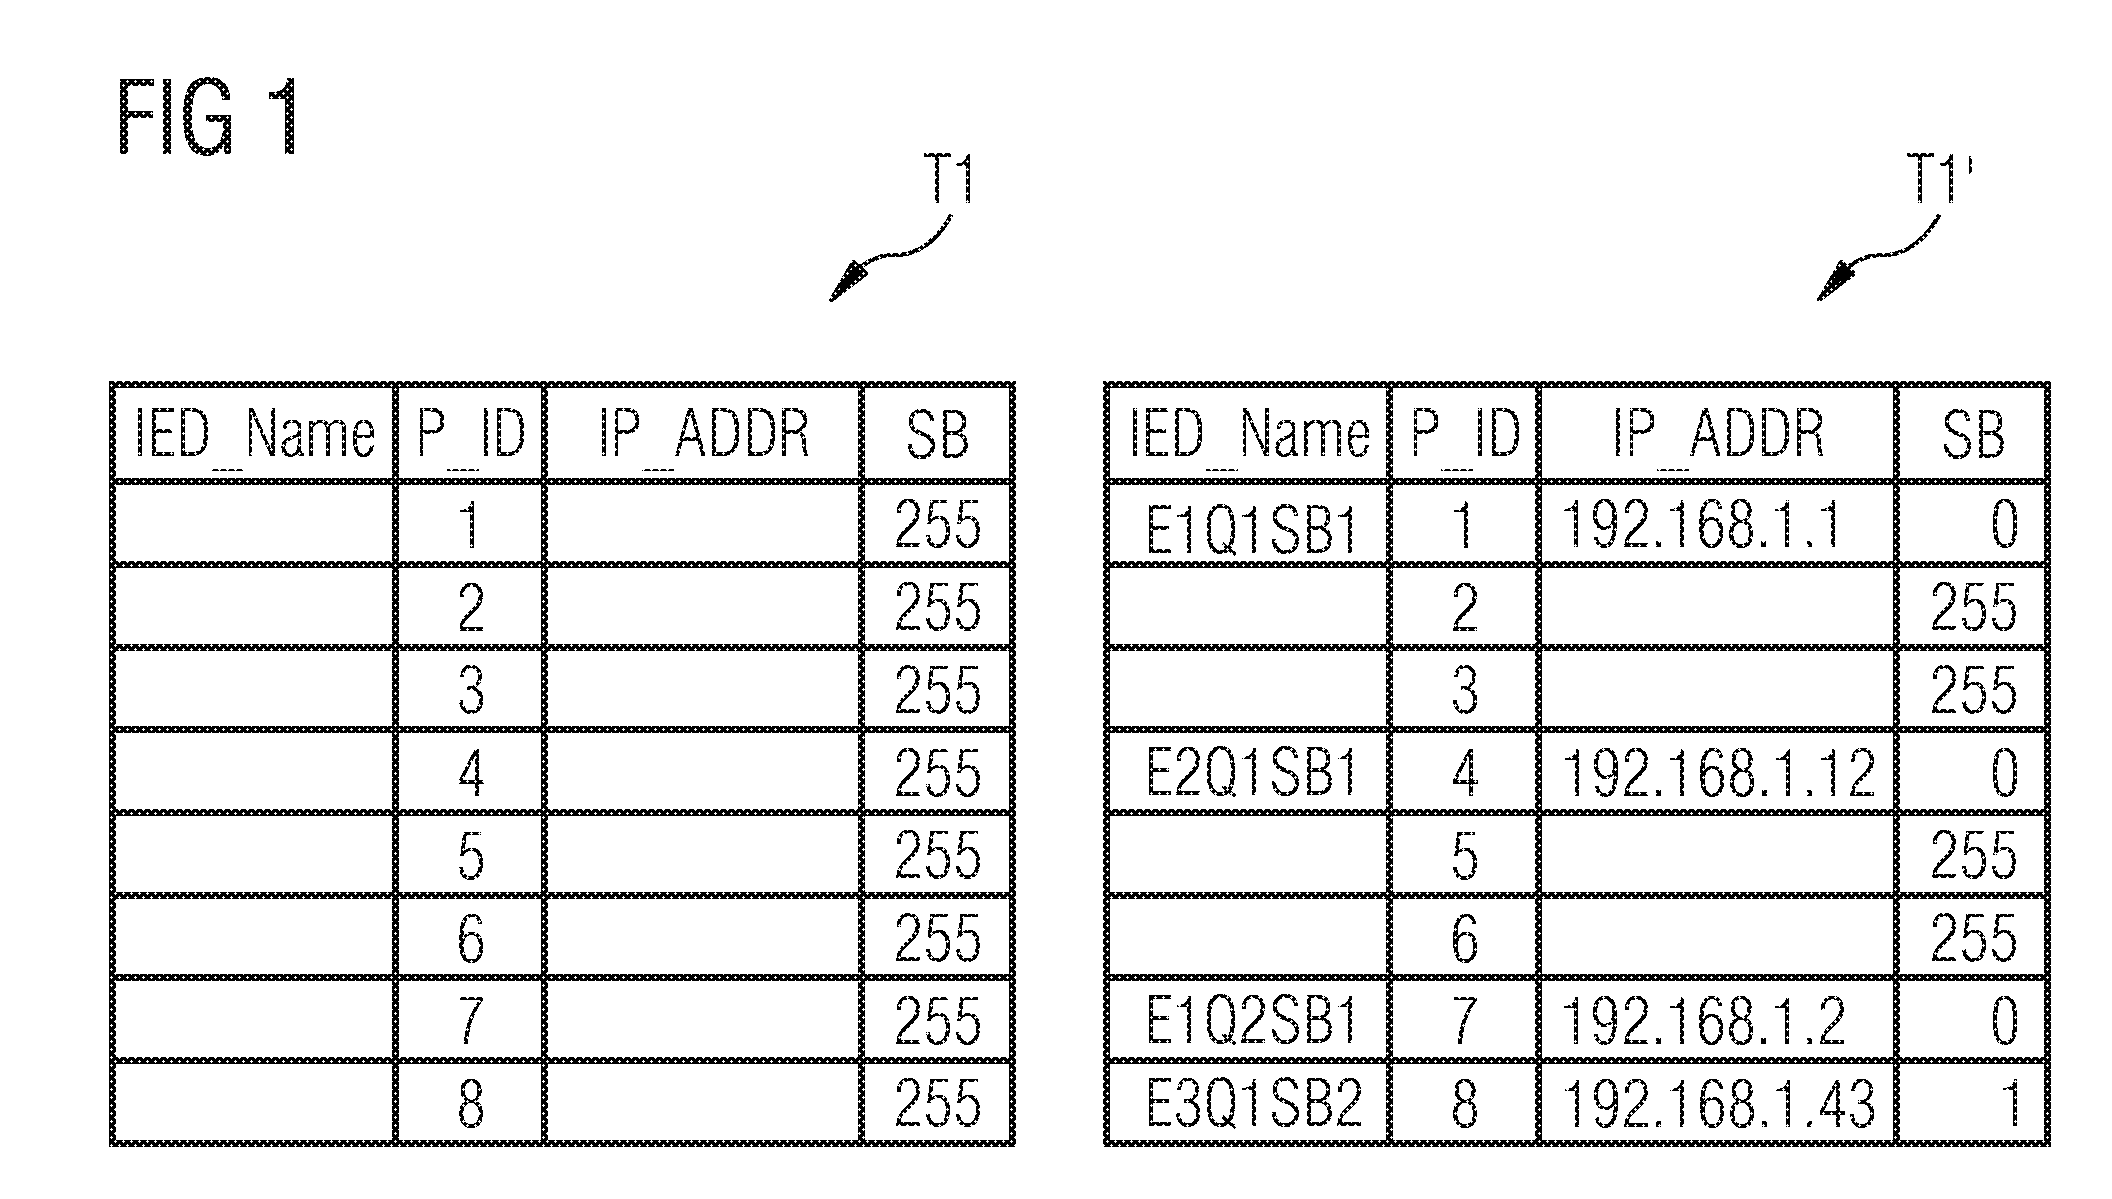 Method for operating a distributed communications network